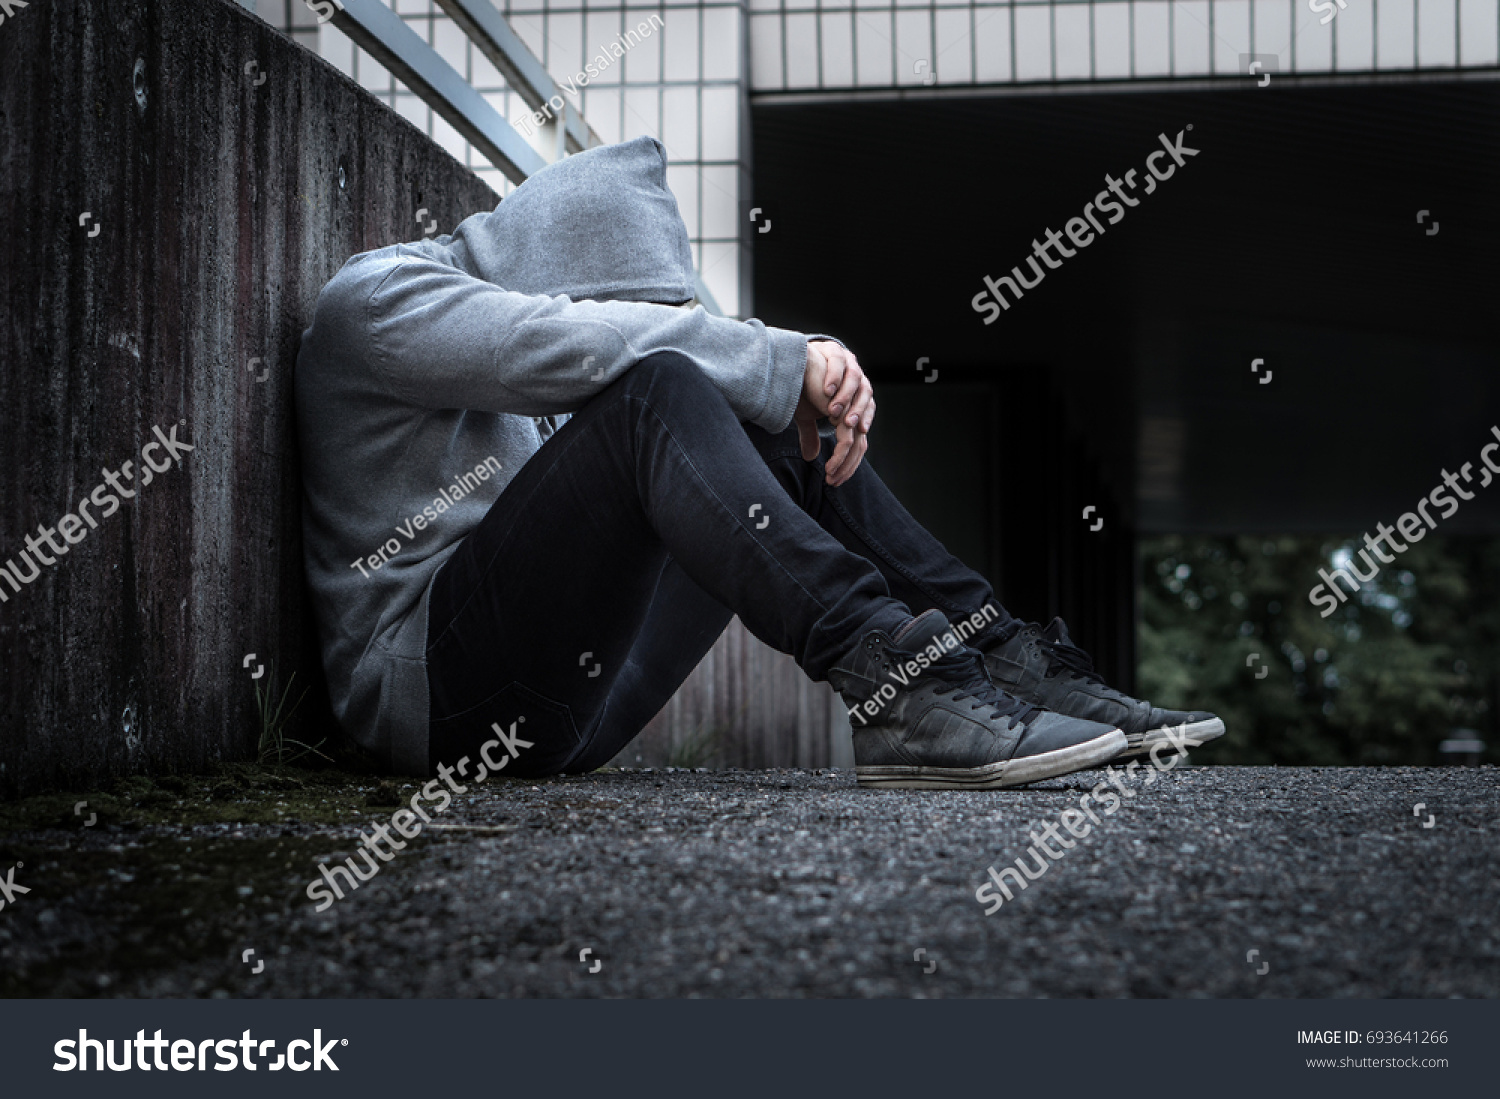 stock-photo-depression-social-isolation-loneliness-mental-health-and-discrimination-concept-sad-lonely-693641266.jpg